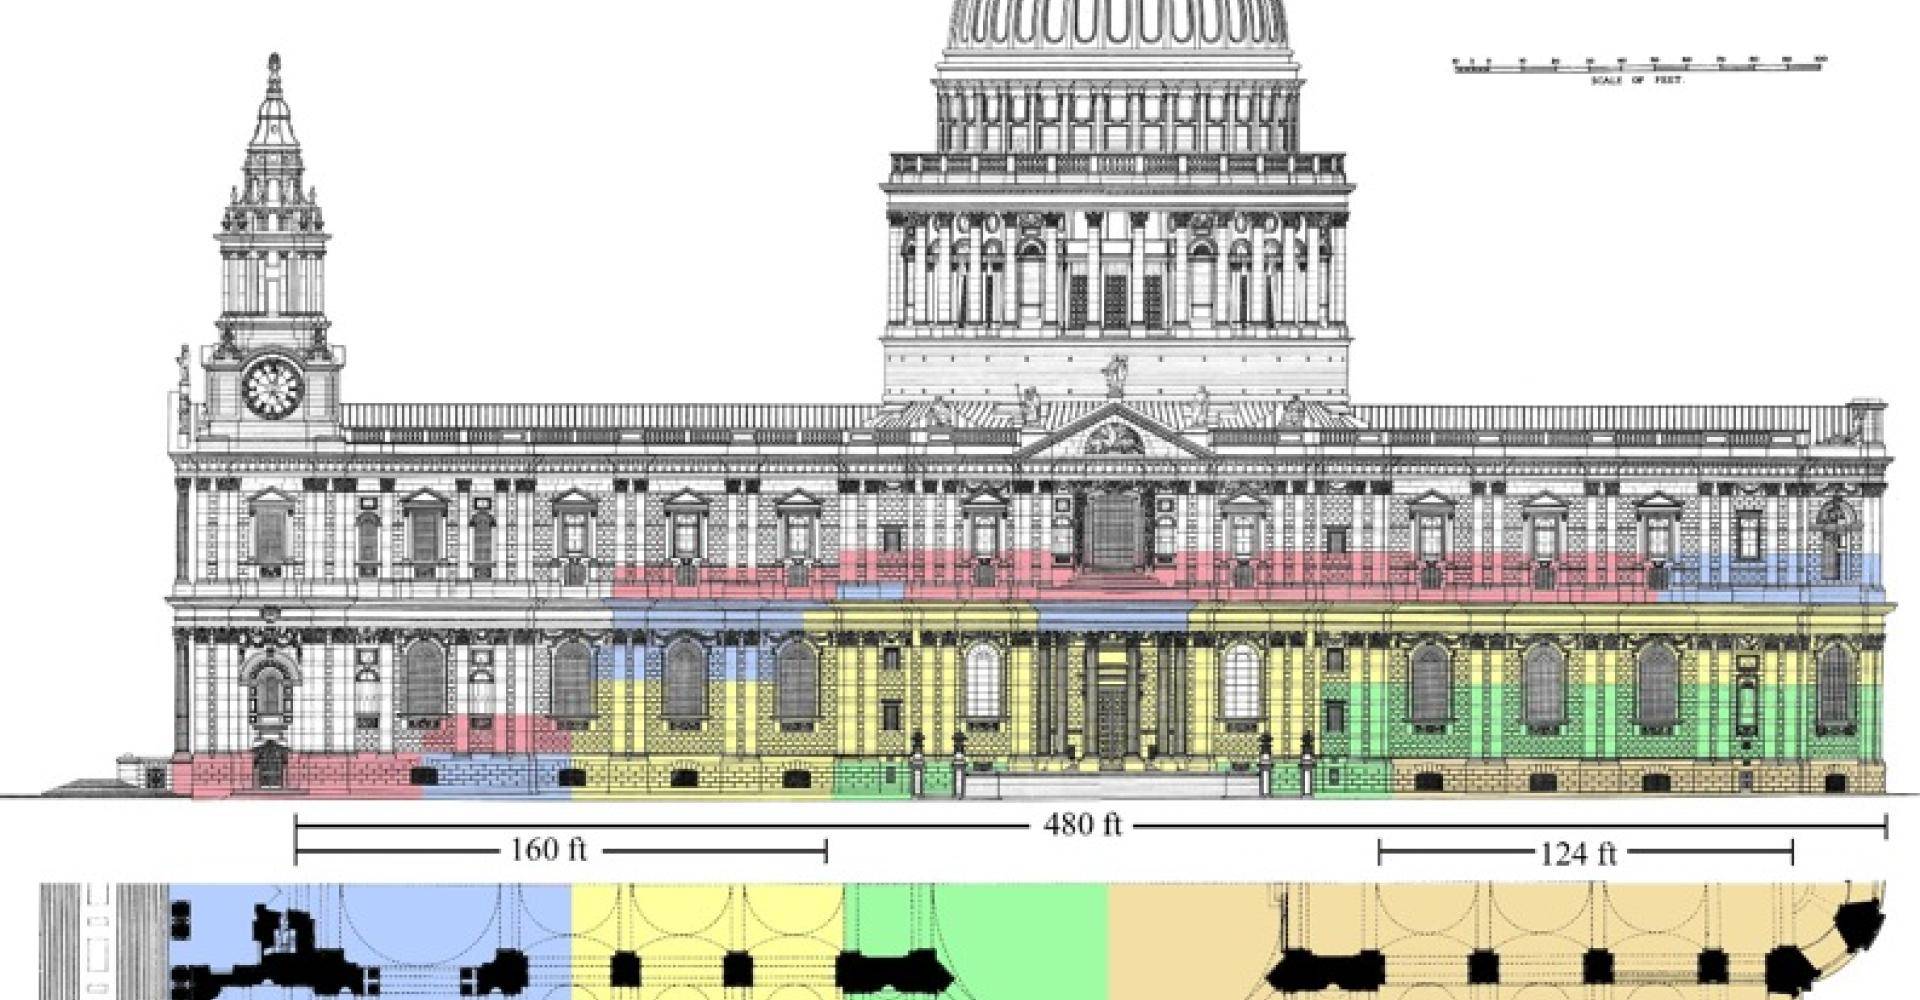 Fig. 7. St Paul’s Cathedral. South elevation and half-plan as built, showing the main phases of construction from 1675 to 1688 (Richard Lea and Gordon Higgott)